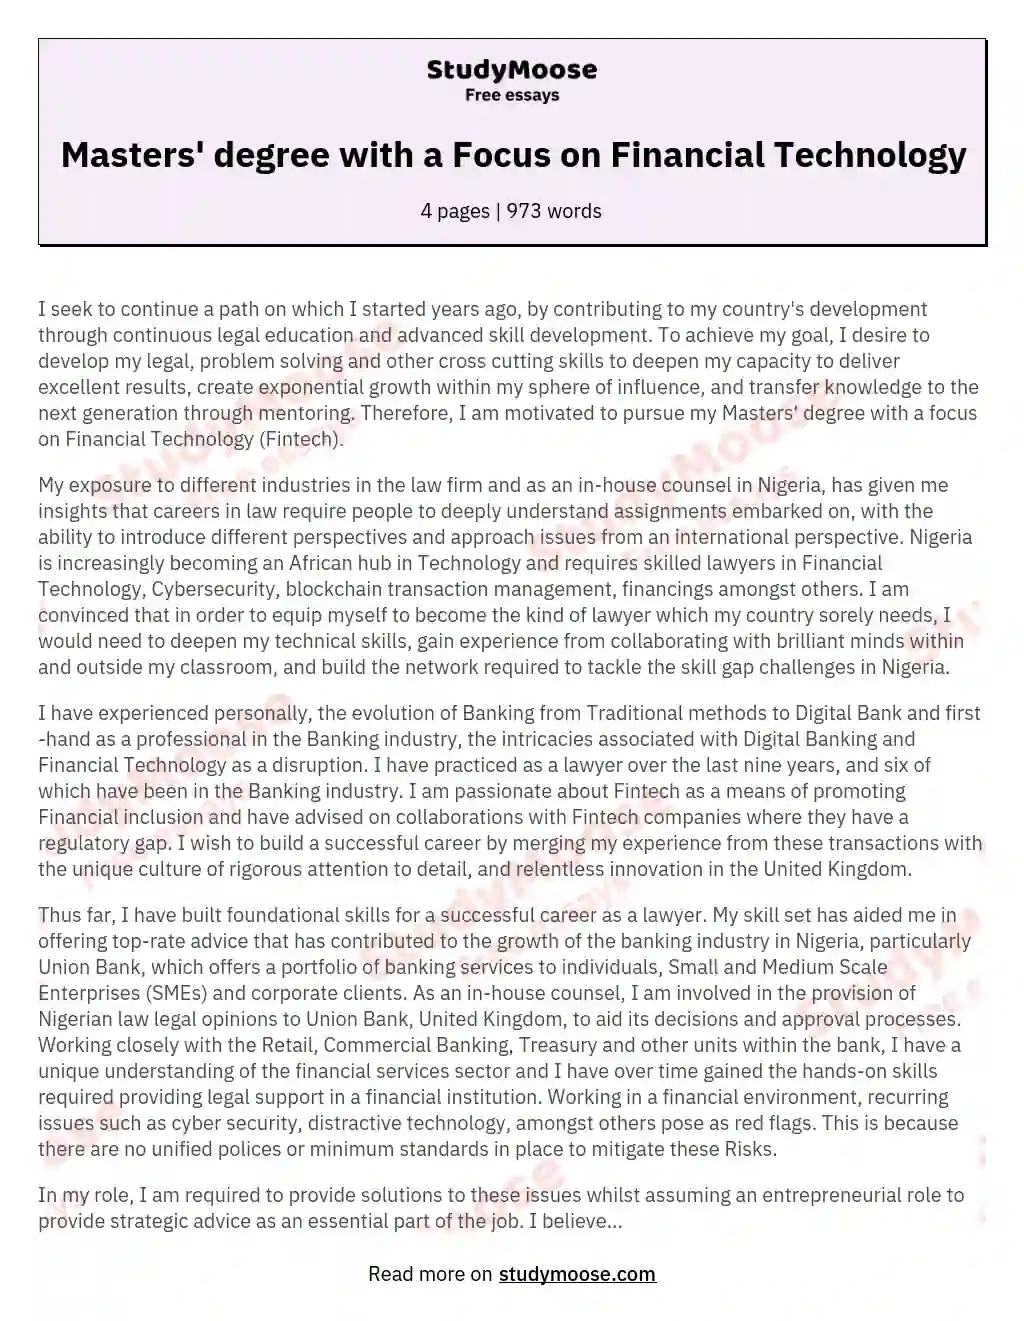 Masters' degree with a Focus on Financial Technology essay